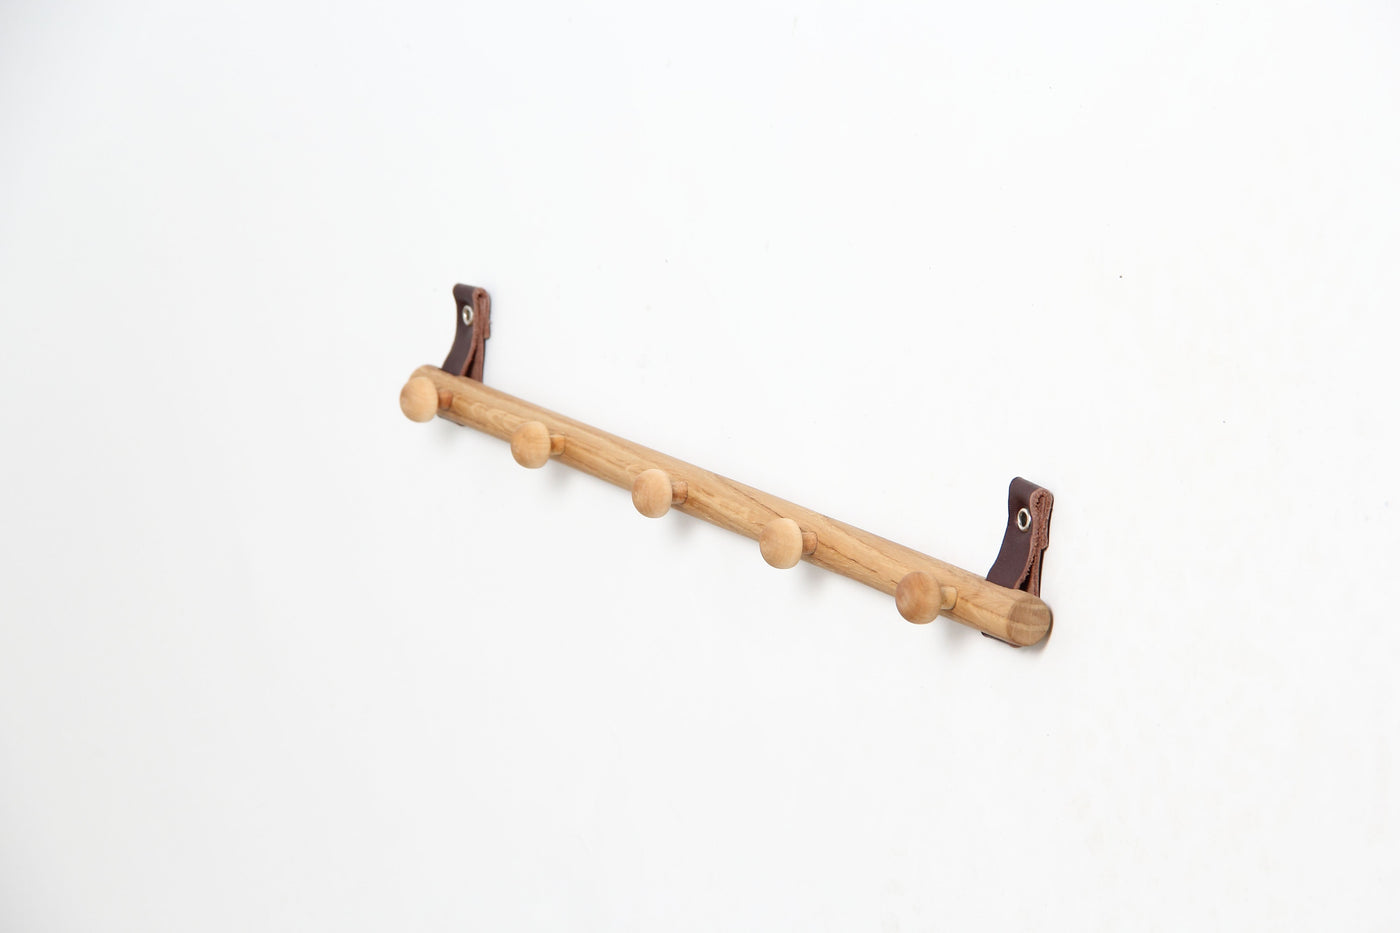 Saule Wooden Wall Hanger-Home Goods-SUSTAINABLE DECOR, WALL HANGERS-Forest Homes-Nature inspired decor-Nature decor